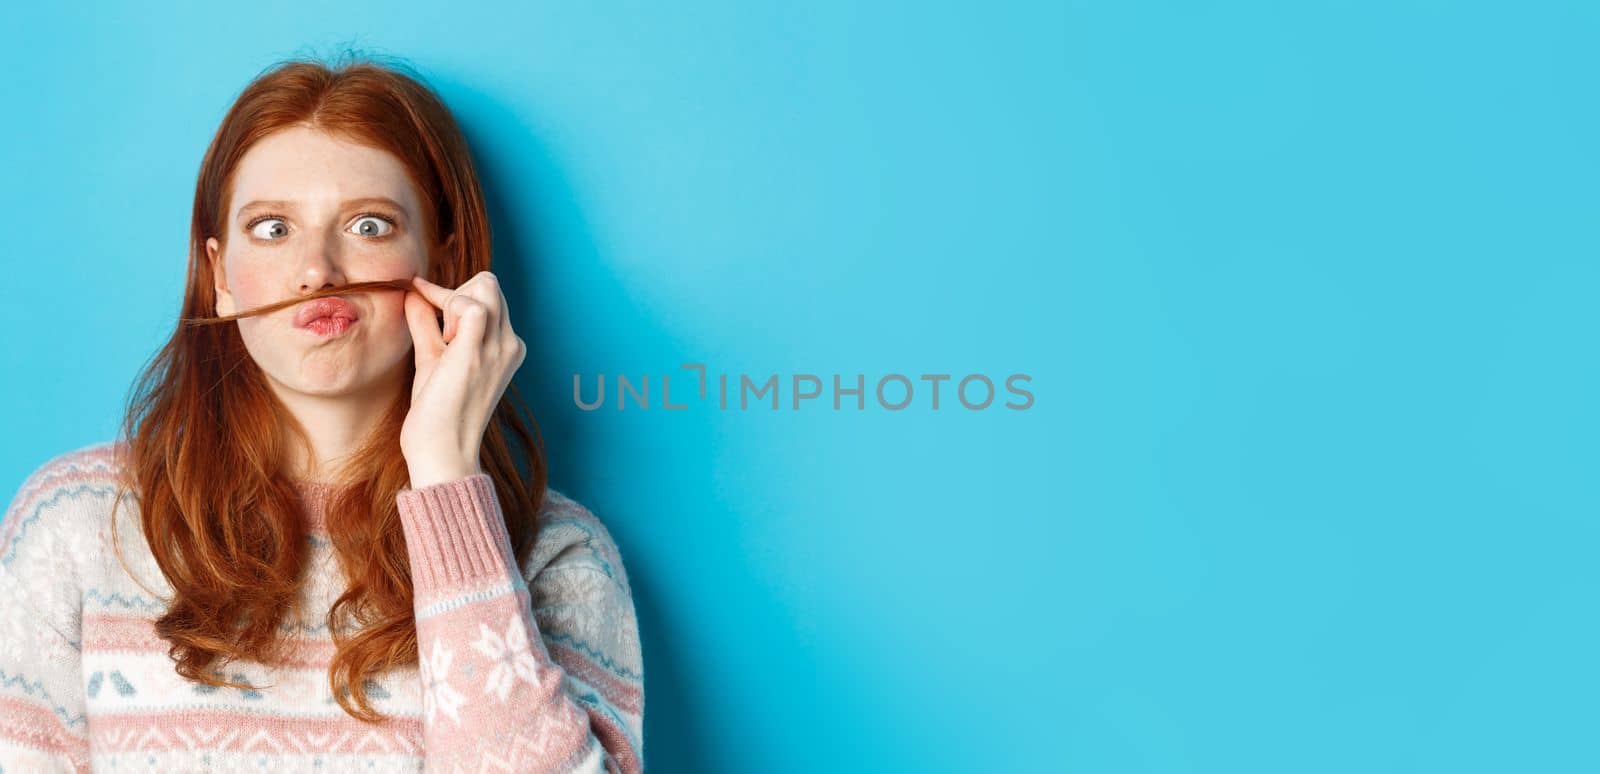 Close-up of silly and funny redhead girl making moustache with hair strand and puckered lips, grimacing against blue background.